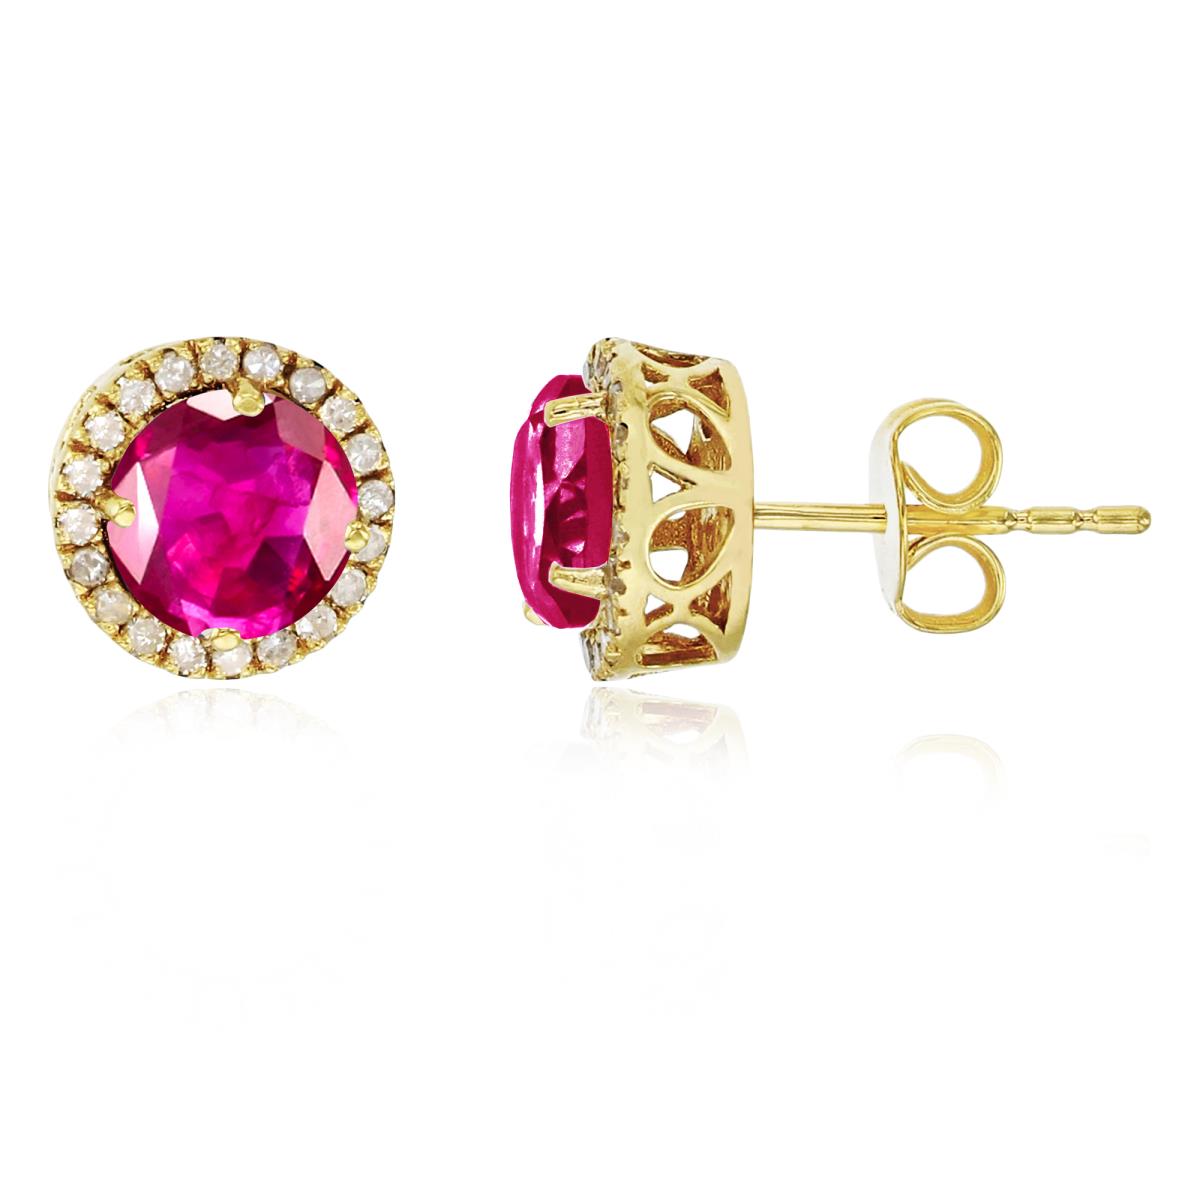 14K Yellow Gold 6mm Round Glass Filled Ruby & 0.2 CTTW Diamond Halo Stud Earring